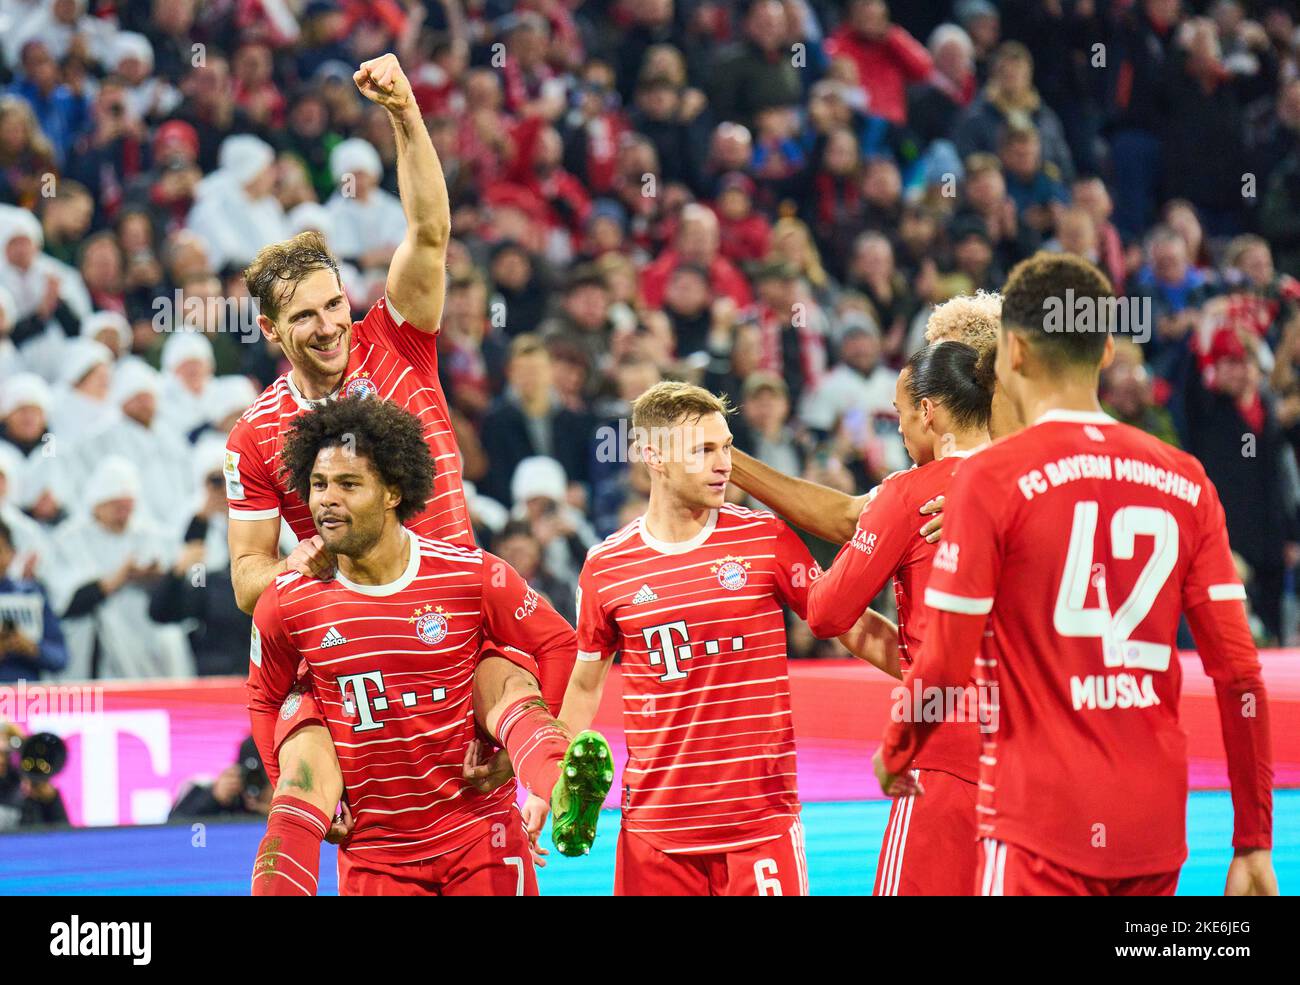 Leon GORETZKA, FCB 8 celebrates his goal, happy, laugh, celebration, 3-1 with Serge GNABRY, FCB 7 Joshua KIMMICH, FCB 6   in the match FC BAYERN MÜNCHEN - SV WERDER BREMEN 6-1 1.German Football League on Nov 8, 2022 in Munich, Germany. Season 2022/2023, matchday 14, 1.Bundesliga, FCB, München, 14.Spieltag © Peter Schatz / Alamy Live News    - DFL REGULATIONS PROHIBIT ANY USE OF PHOTOGRAPHS as IMAGE SEQUENCES and/or QUASI-VIDEO - Stock Photo